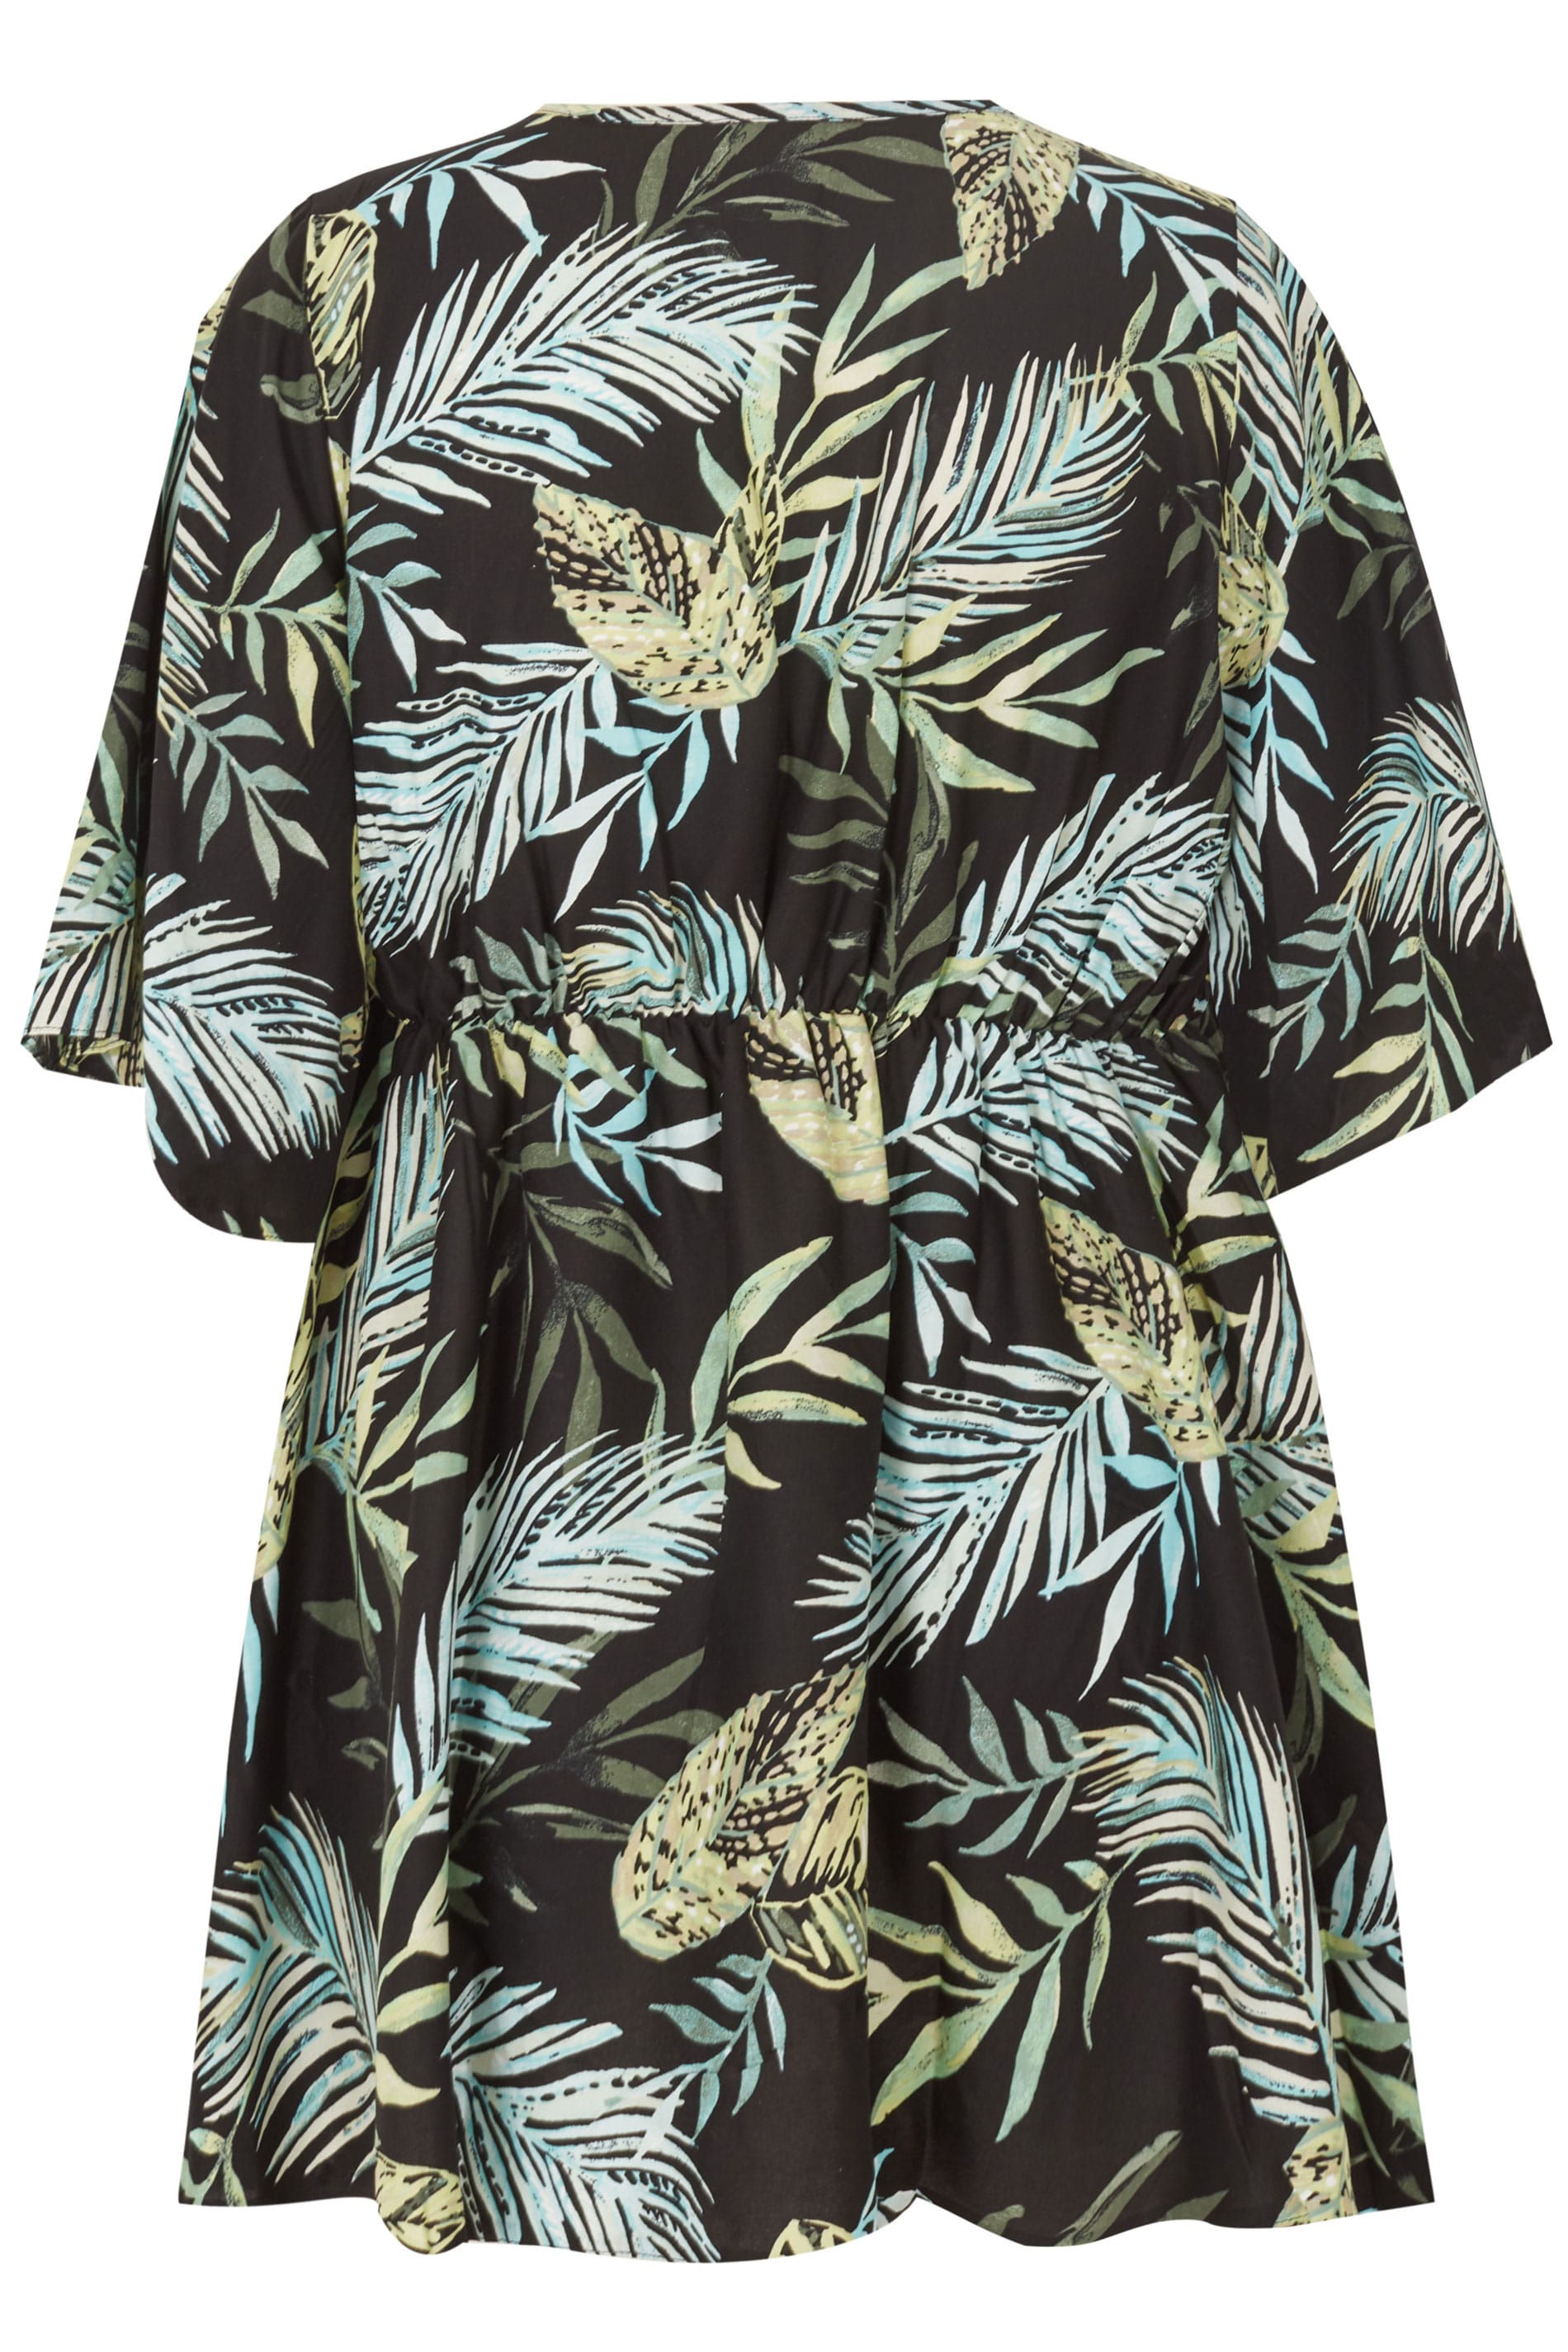 YOURS LONDON Black & Green Palm Leaf Wrap Blouse With Kimono Sleeves ...